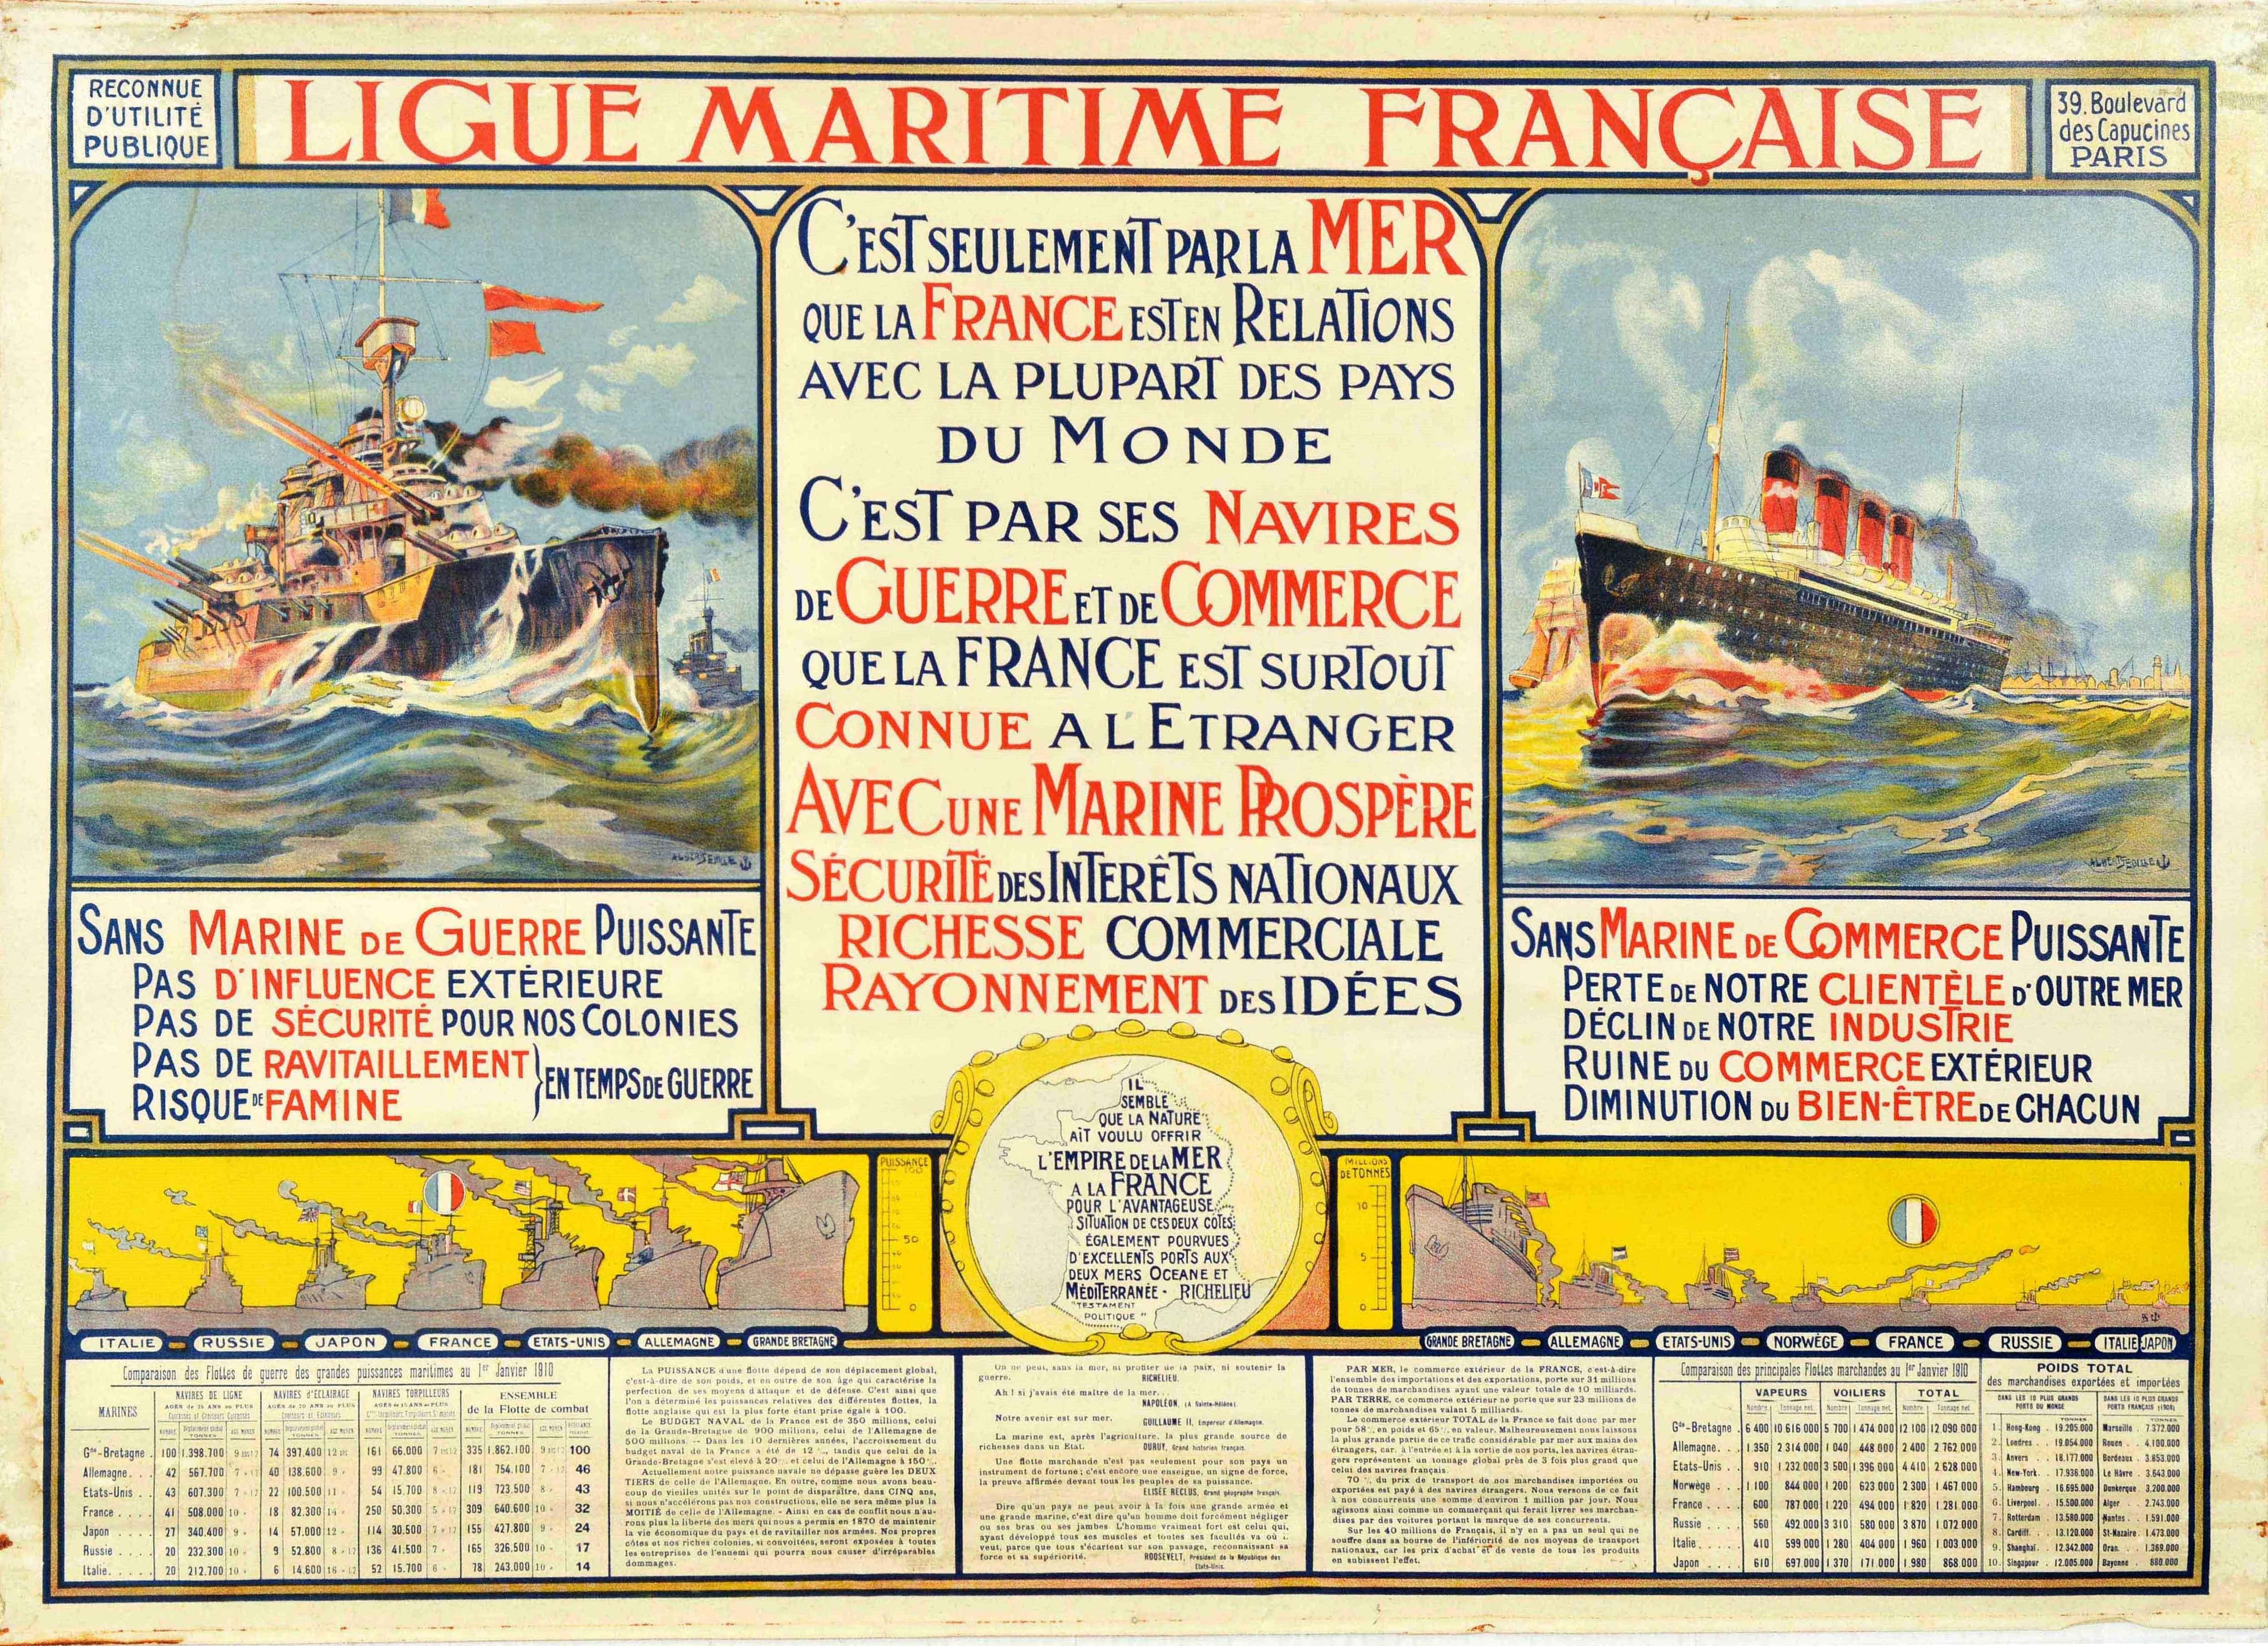 Original antique poster for the Ligue Maritime Francais / French Maritime League featuring a warship firing guns at sea and an ocean liner cruise ship with the benefits of both listed in the centre - C'est seulement par la mer que la France est en